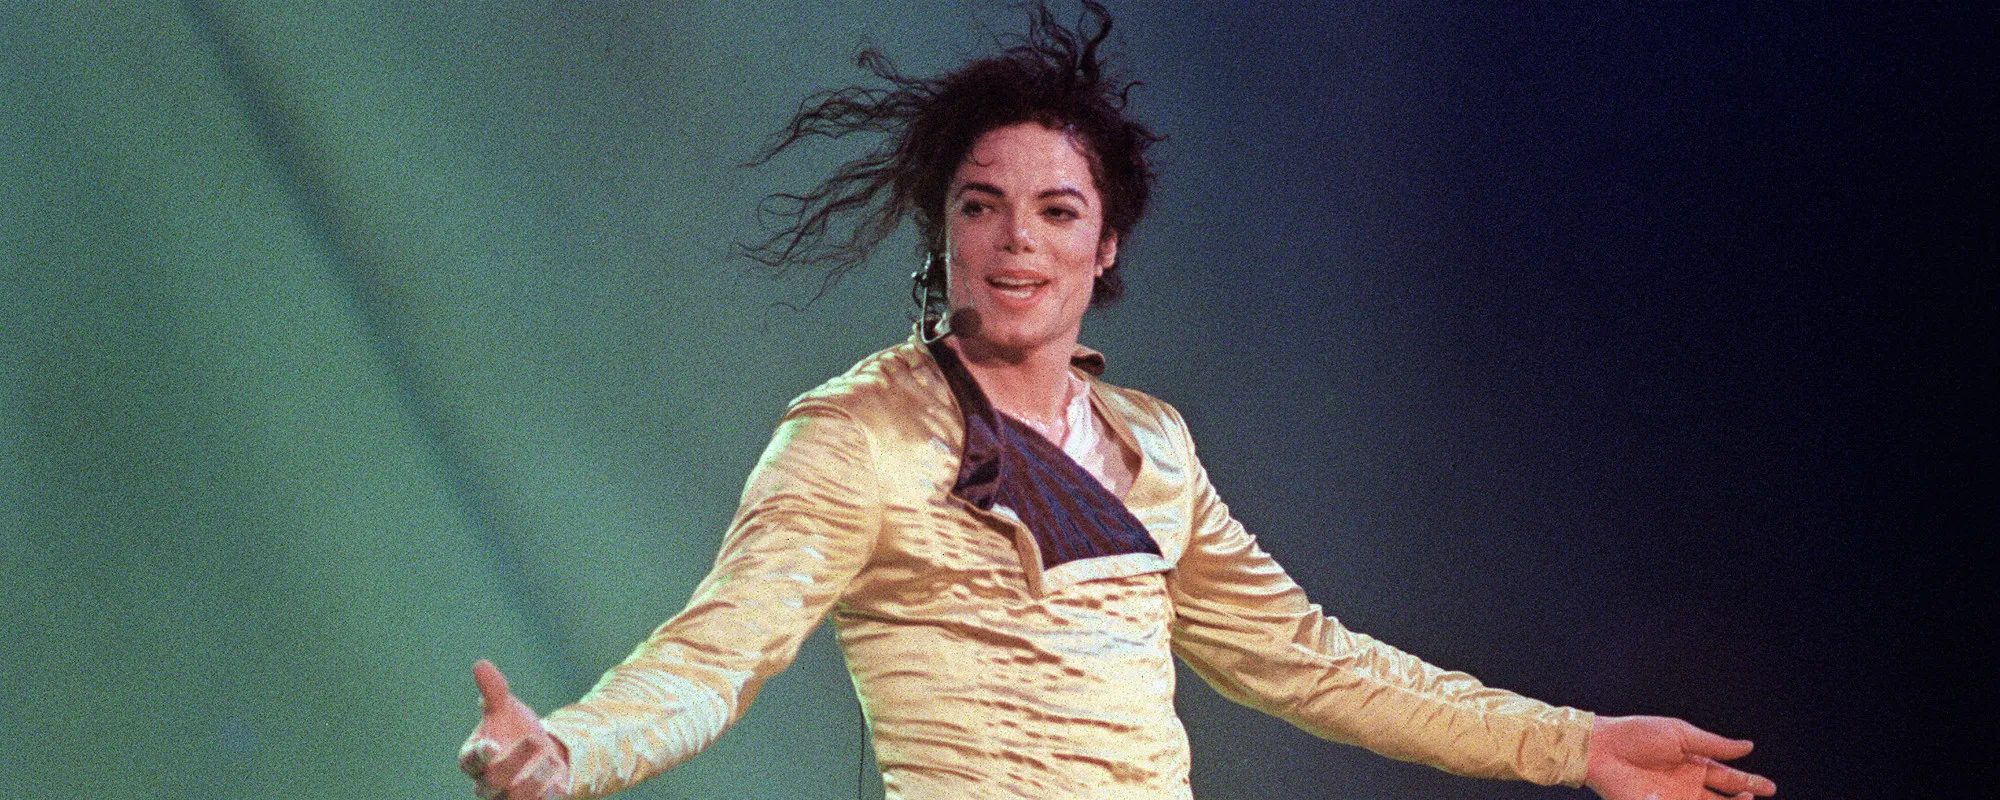 Behind the Meaning of the 1988 Michael Jackson Hit “Man in the Mirror”